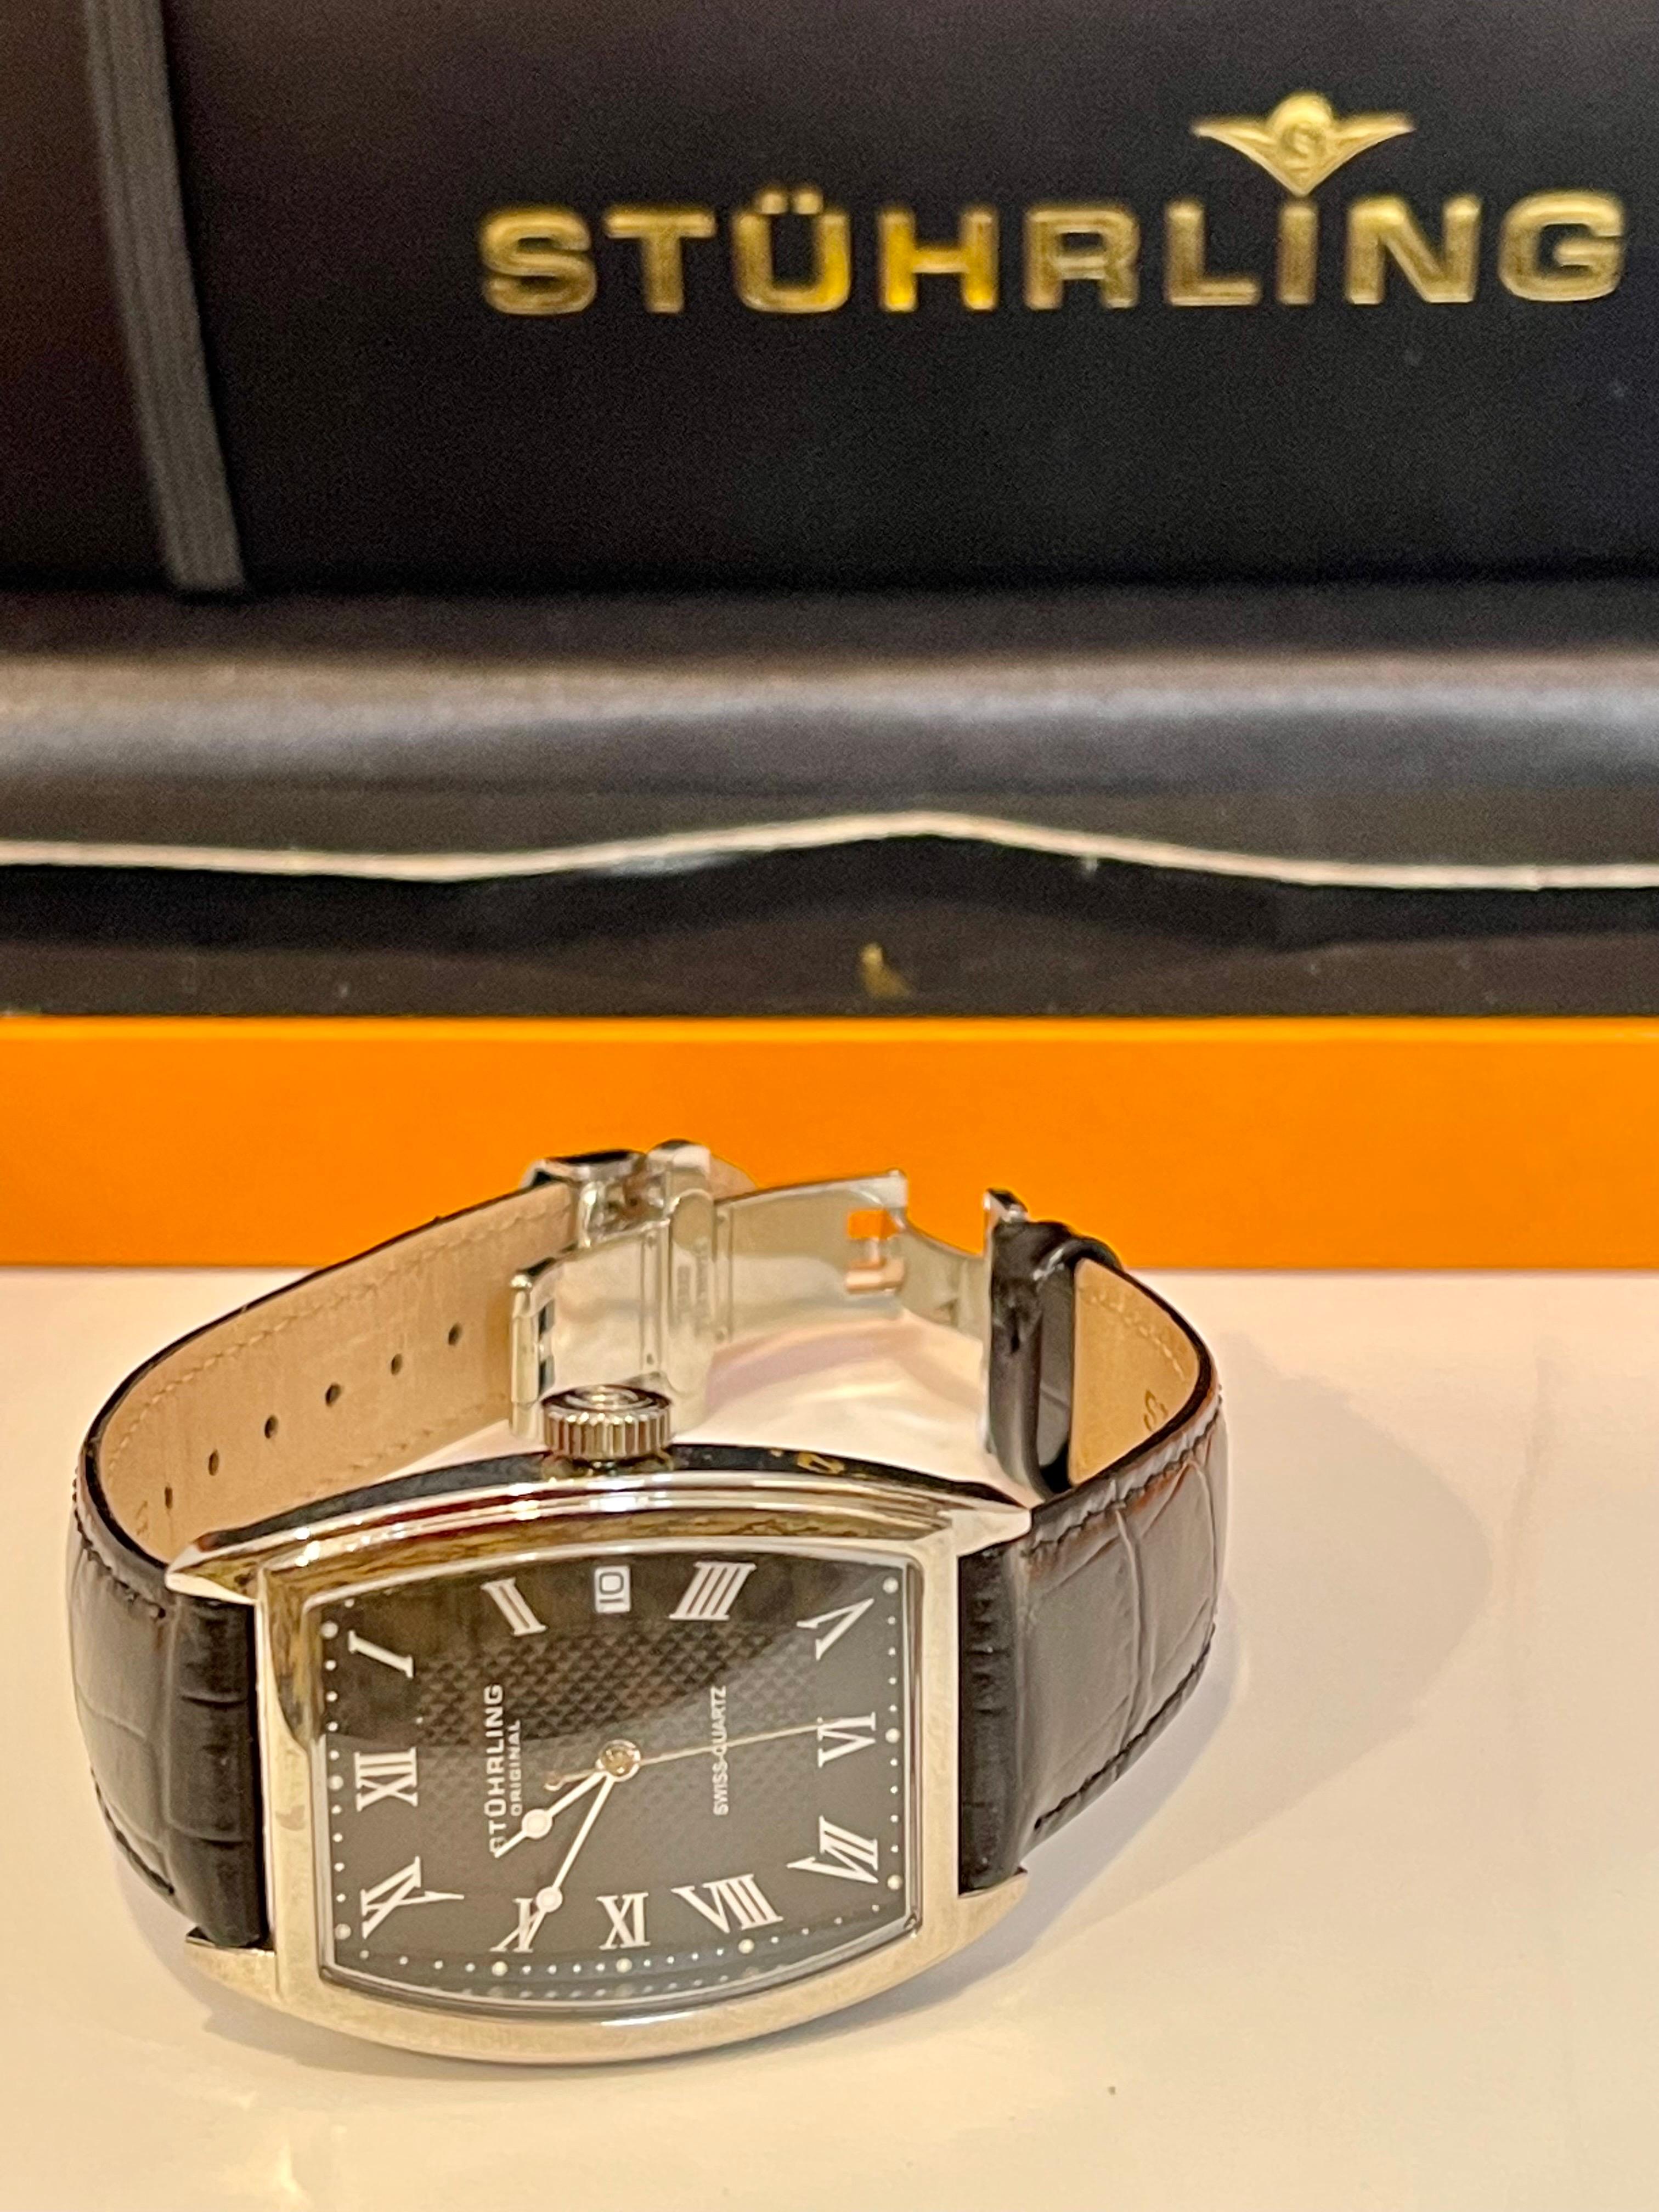 Stuhrling Brand New Watch with Box Paper and Leather Belt In Excellent Condition For Sale In New York, NY